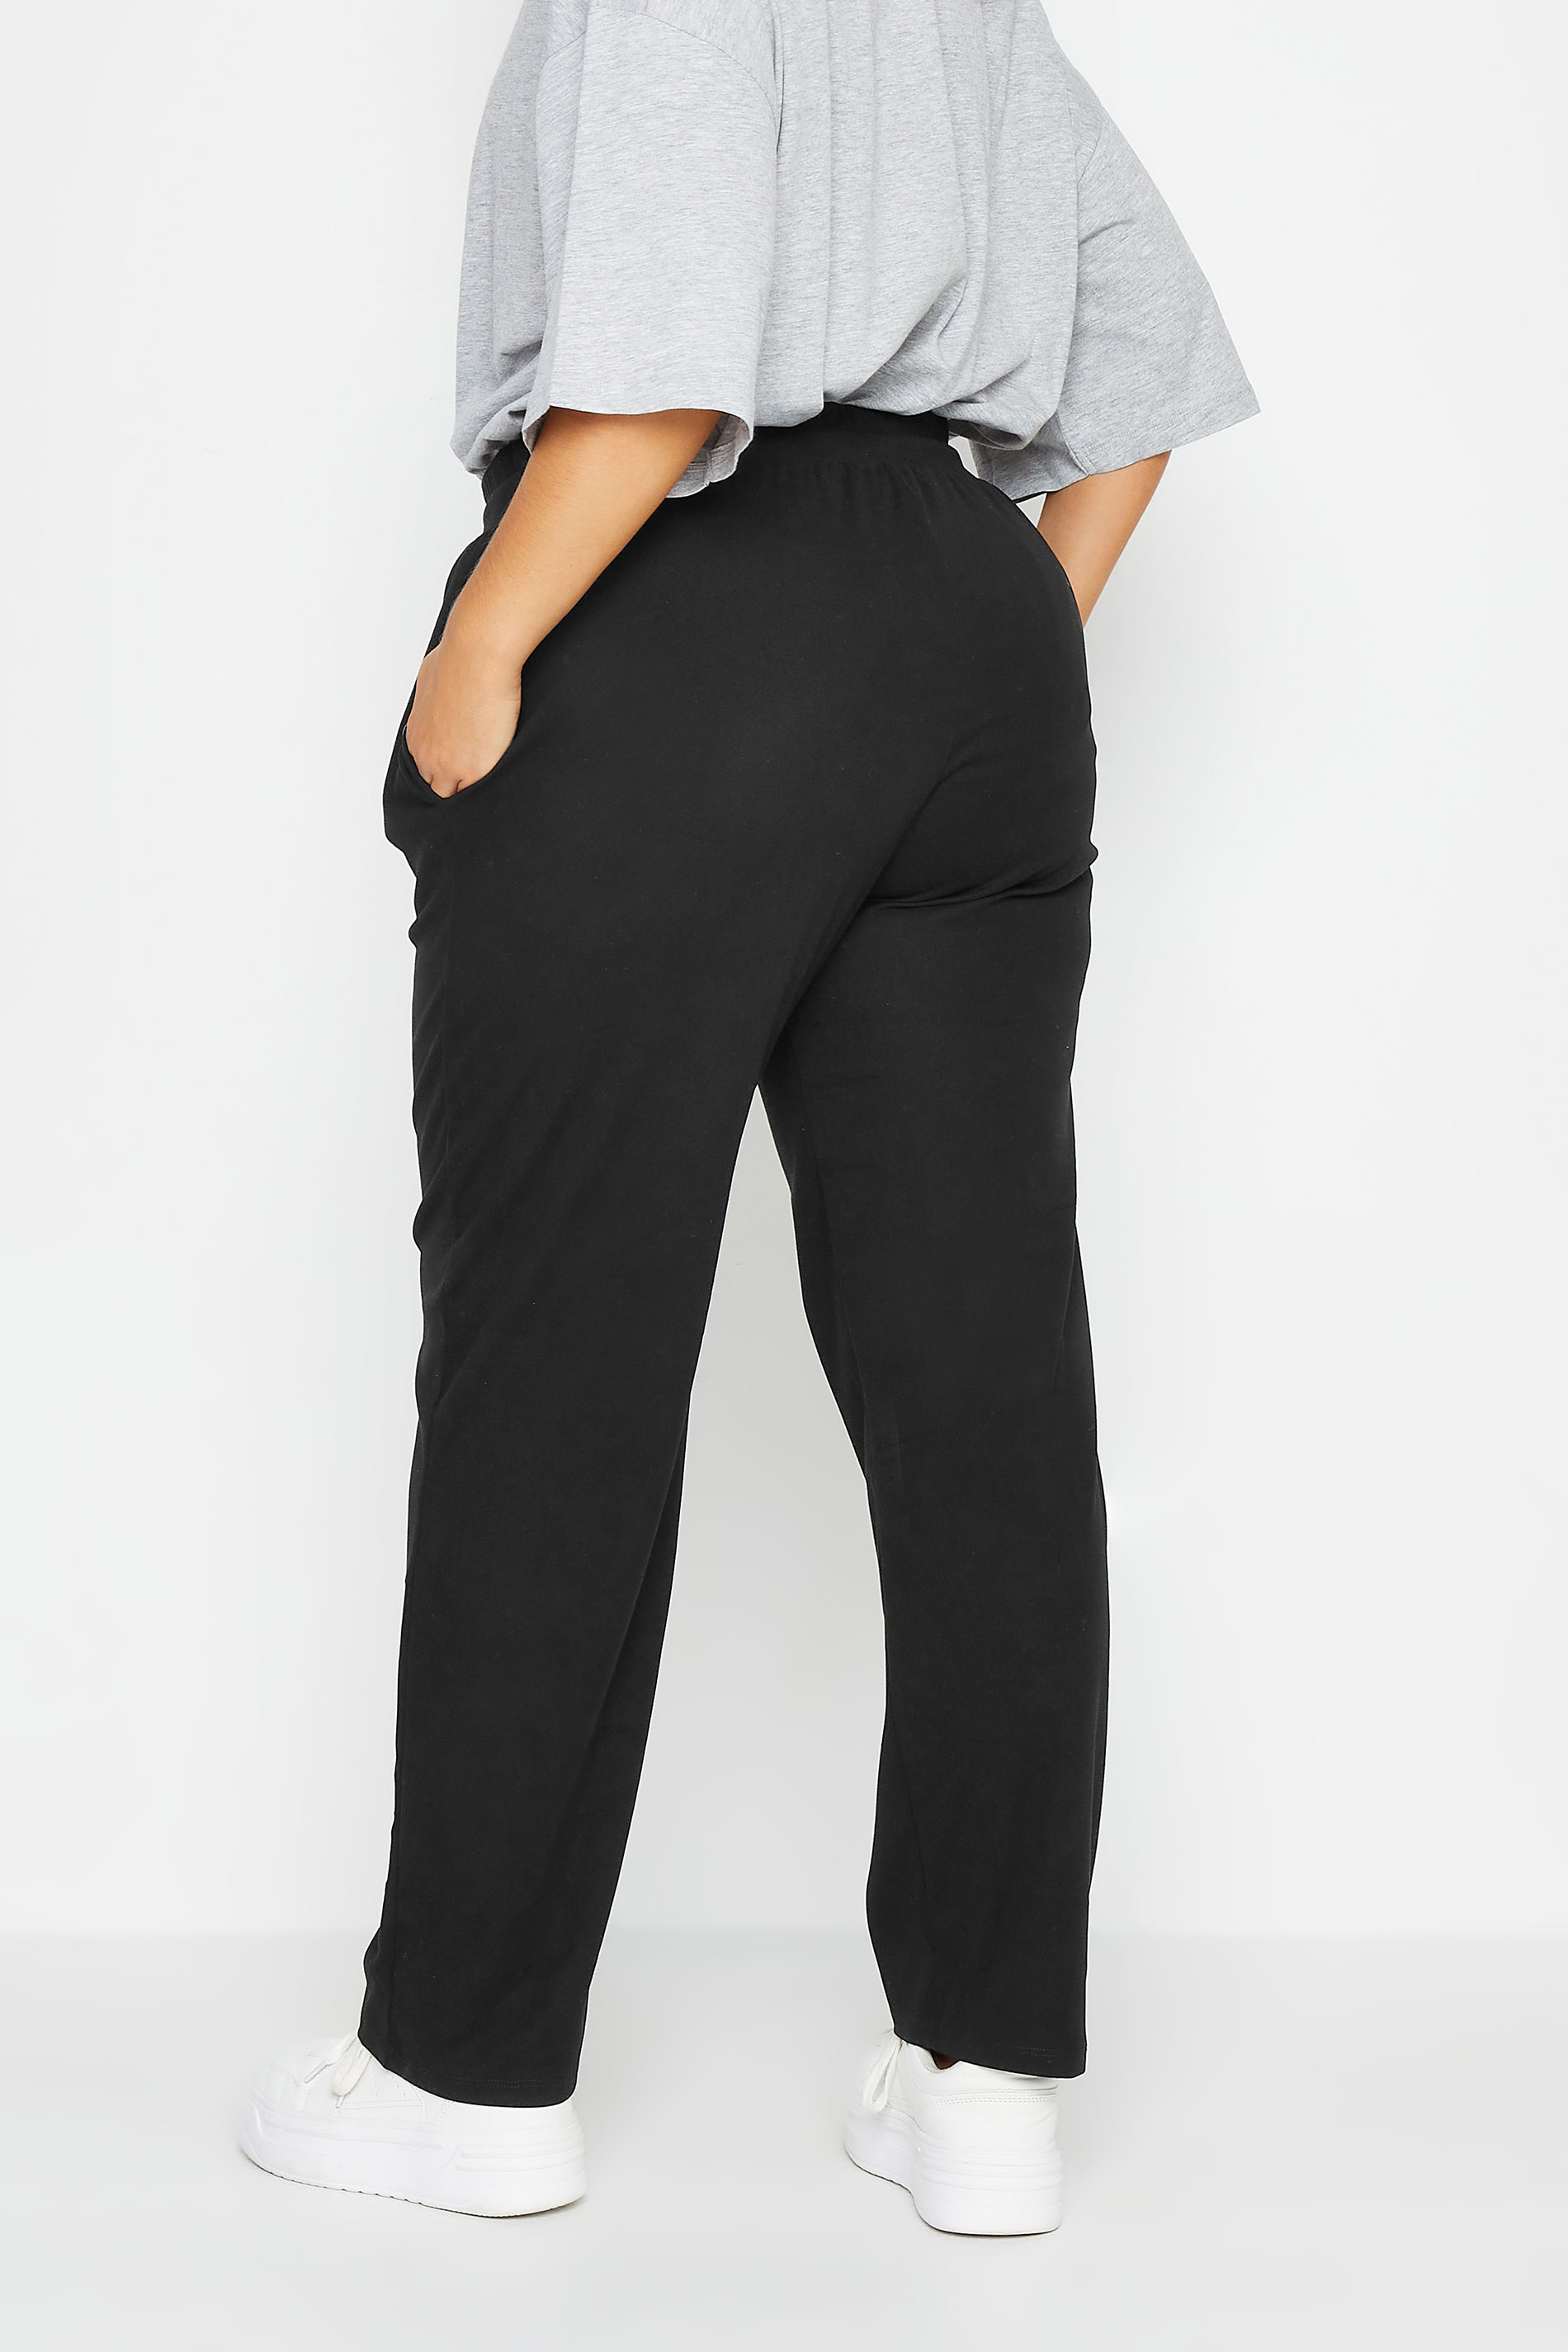 YOURS Plus Size Black Straight Leg Joggers | Yours Clothing 3